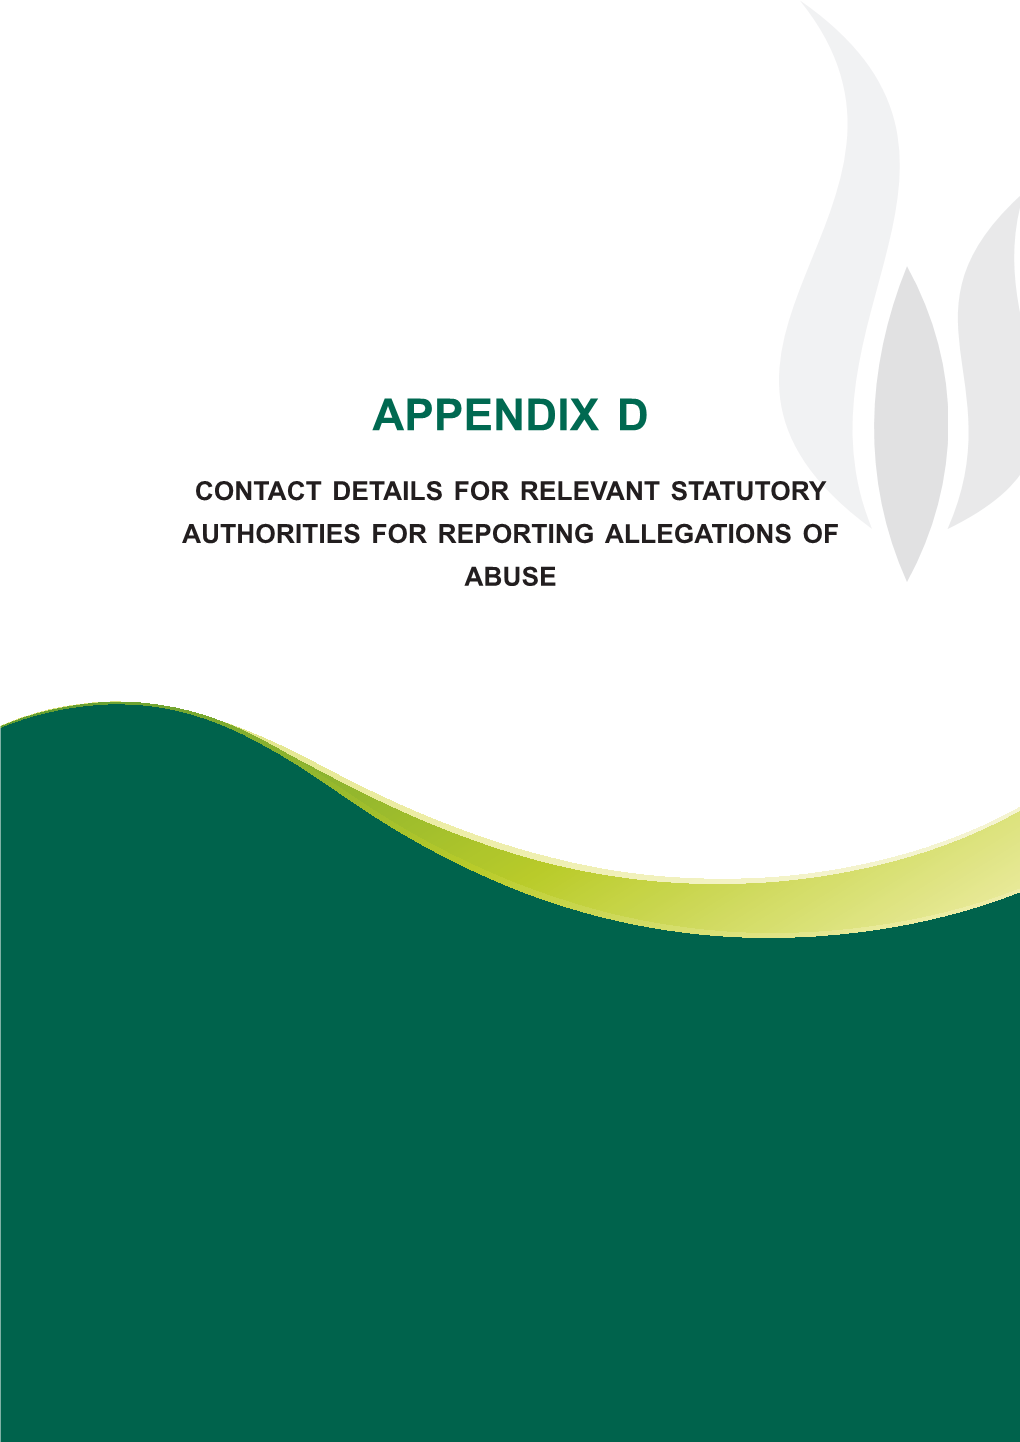 Contact Details for Relevant Statutory Authorities for Reporting Allegations of Abuse Appendix D